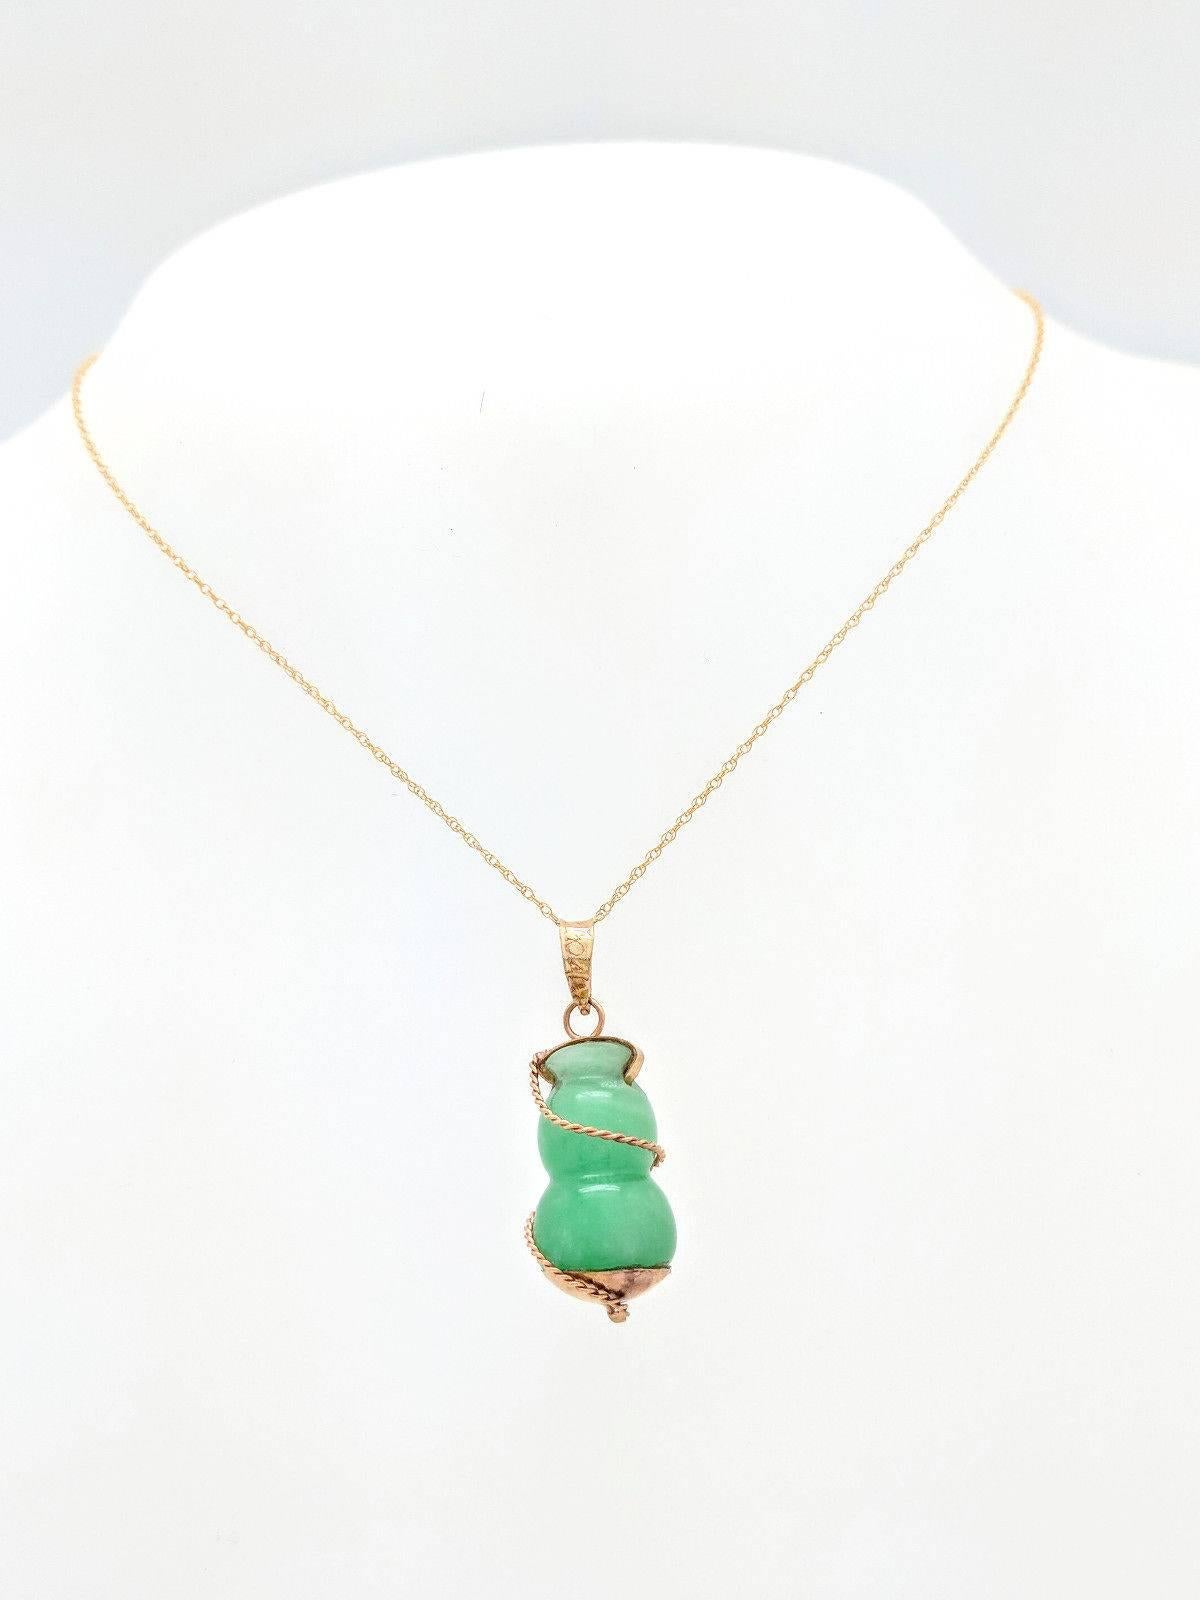 Ladies 16k Yellow Gold Green Jade Pendant Necklace 5.1 Grams

You are viewing a Beautiful Green Jade Pendant Necklace. The pendant is crafted from 16k yellow gold and measures 25mm x 12mm. It hangs beautifully on a 14k yellow gold 18